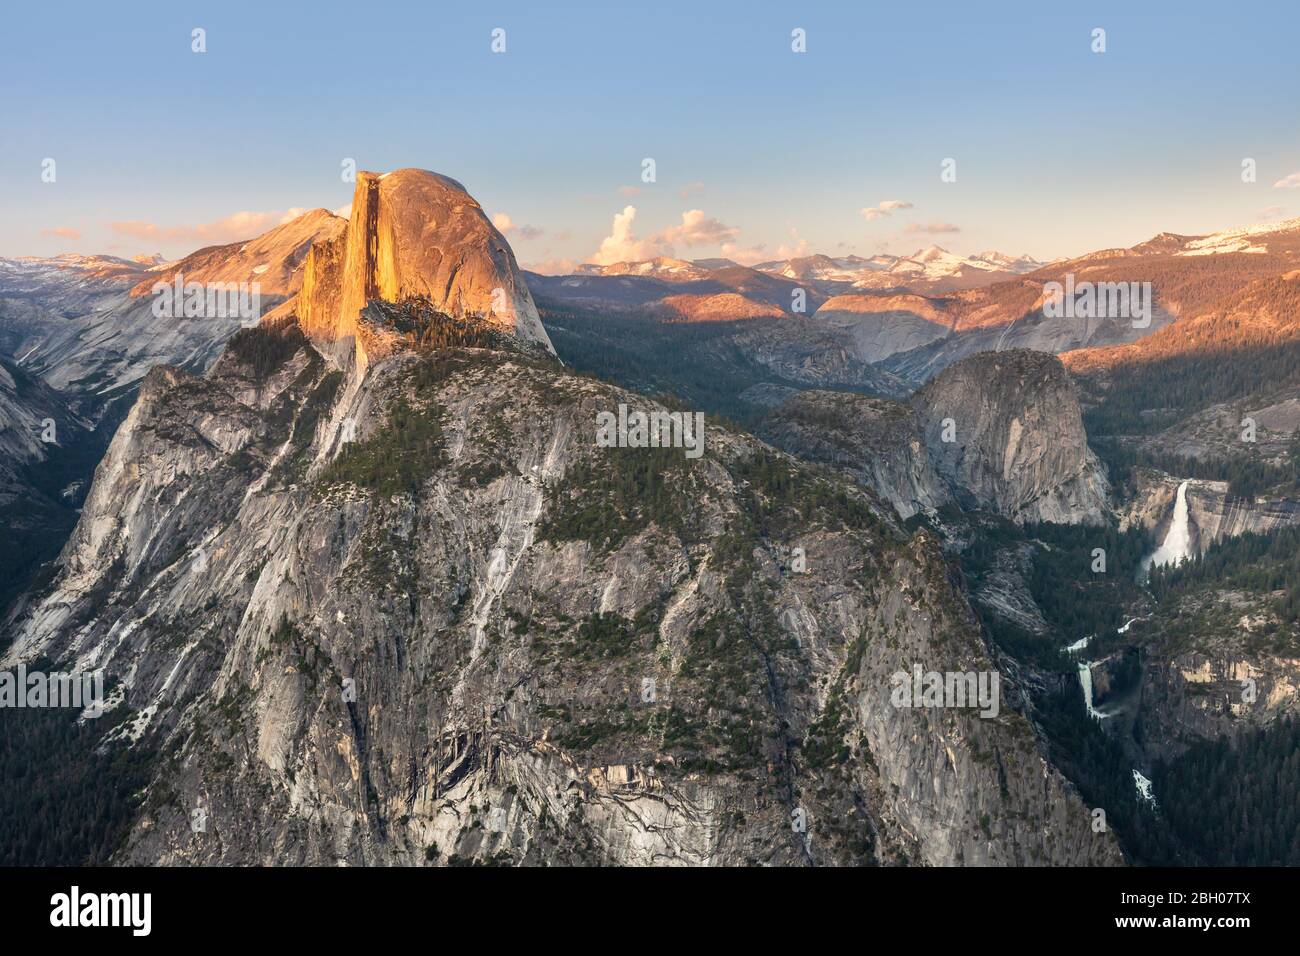 The Half Dome peak and Yosemite Falls waterfall as seen from Glacier Point at sunset Stock Photo